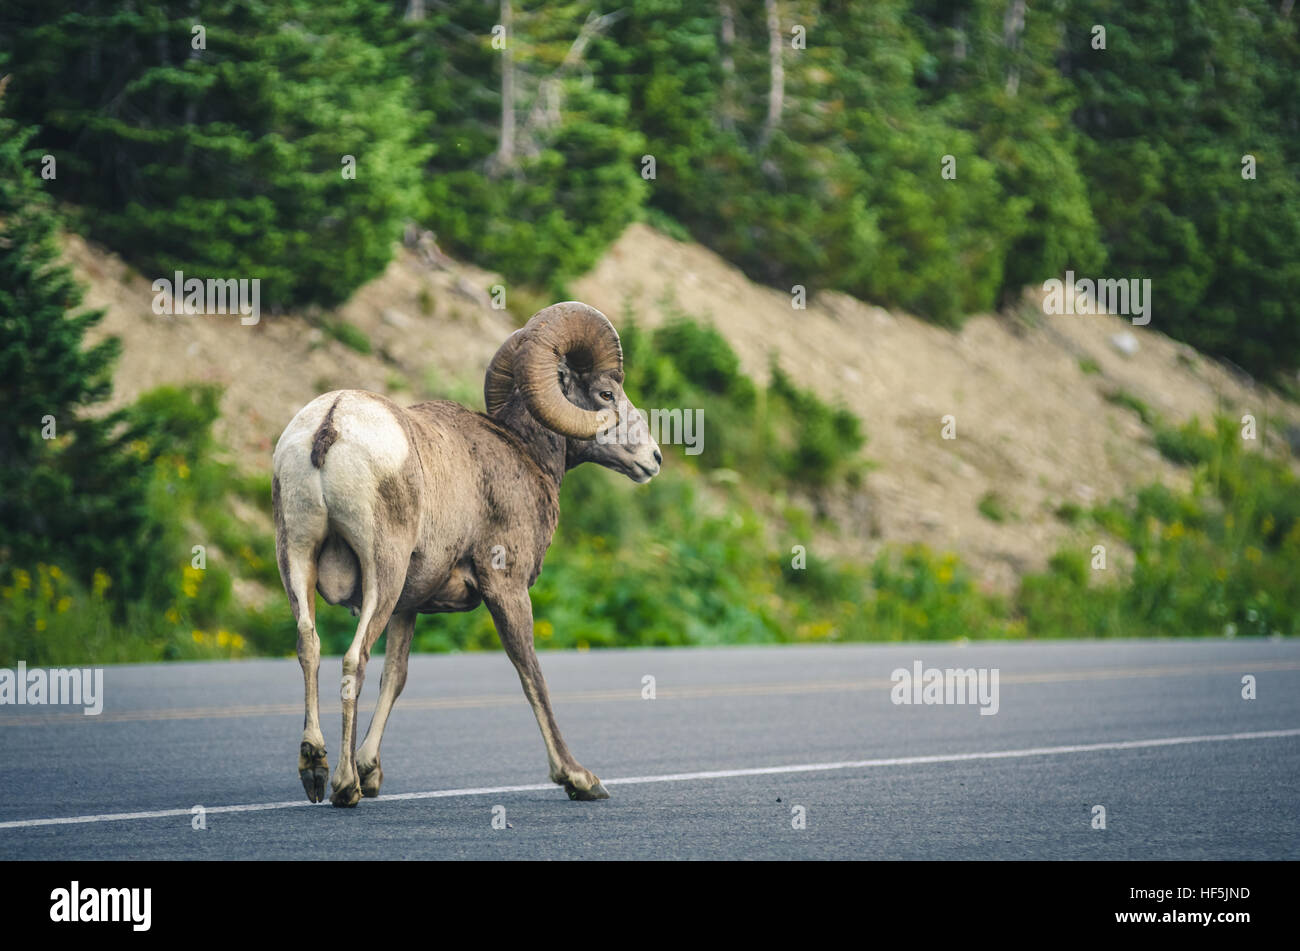 Big horned sheep on the road. Stock Photo